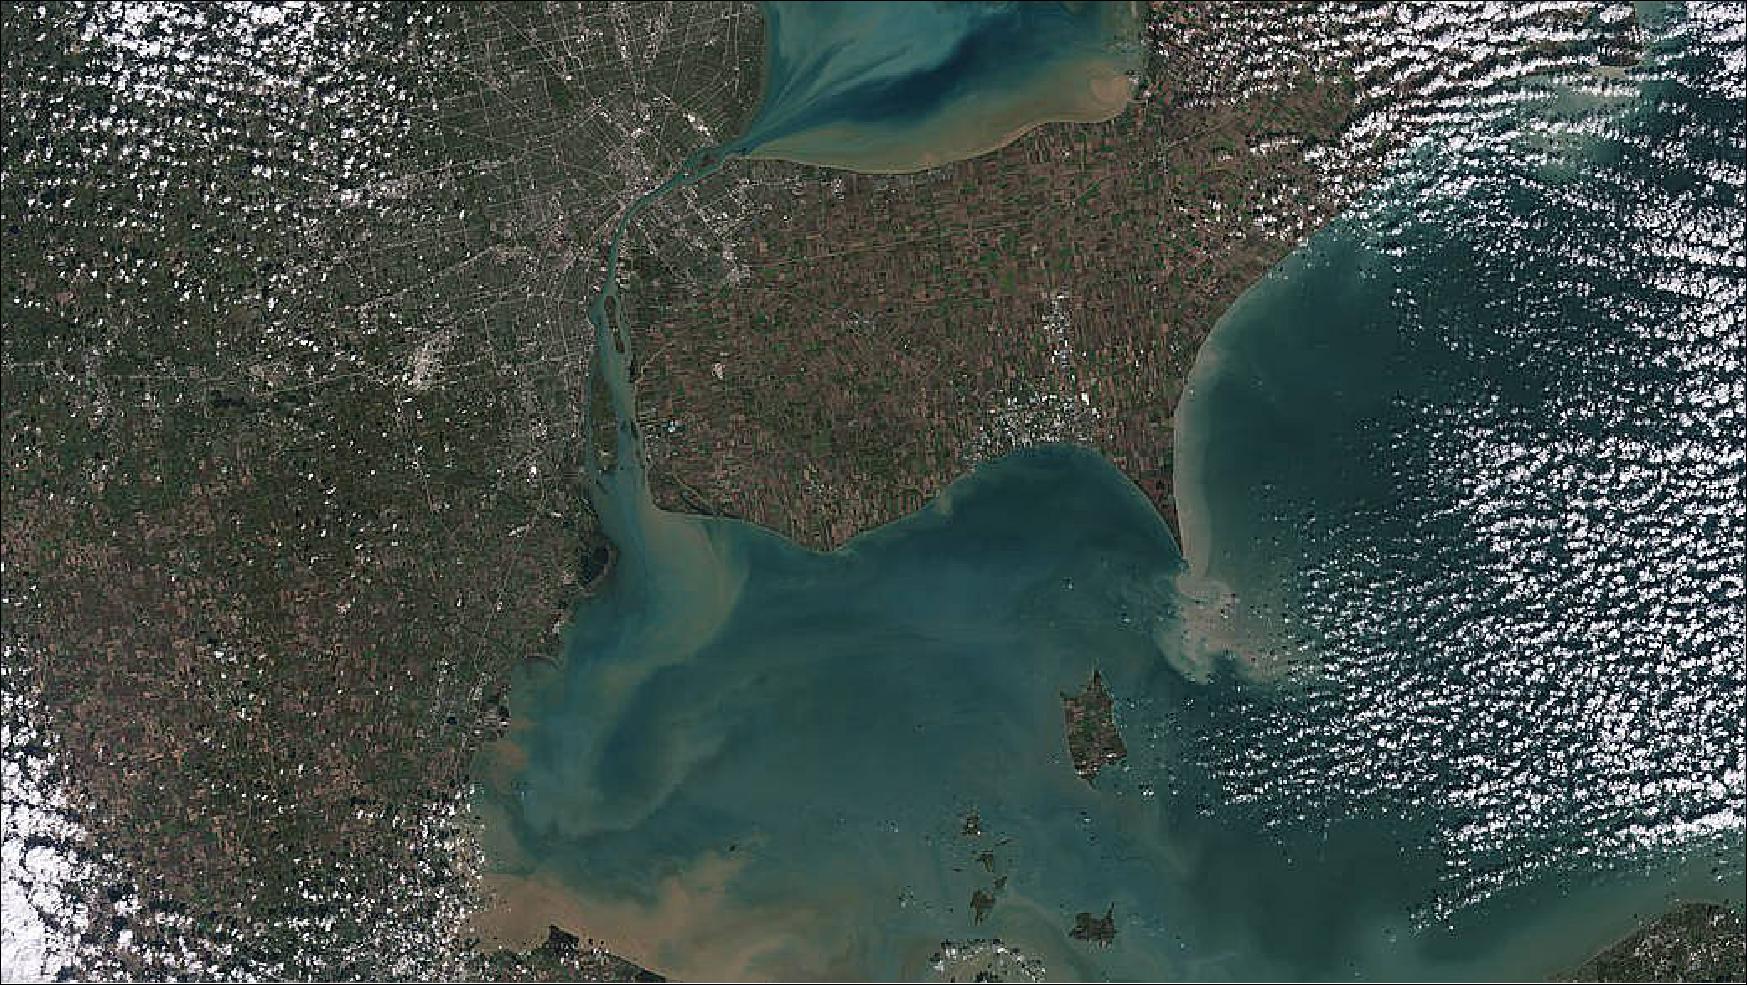 Figure 51: Sediments swirl in Lake Erie and Lake St. Clair in this Landsat 9 image of both Detroit, Michigan, and Windsor, Ontario, from Oct. 31, 2021. The Great Lakes serve as sources of freshwater, recreational activity, transport, and habitat for the upper-midwestern United States, and water quality remains a high priority. In warmer months, Landsat-9 observes swirls of green algae which can become harmful algal blooms. Landsat-9 will be able to help scientists and resource managers identify those blooms early, identifying areas to test further (image credit: NASA/USGS, Michael Bock)